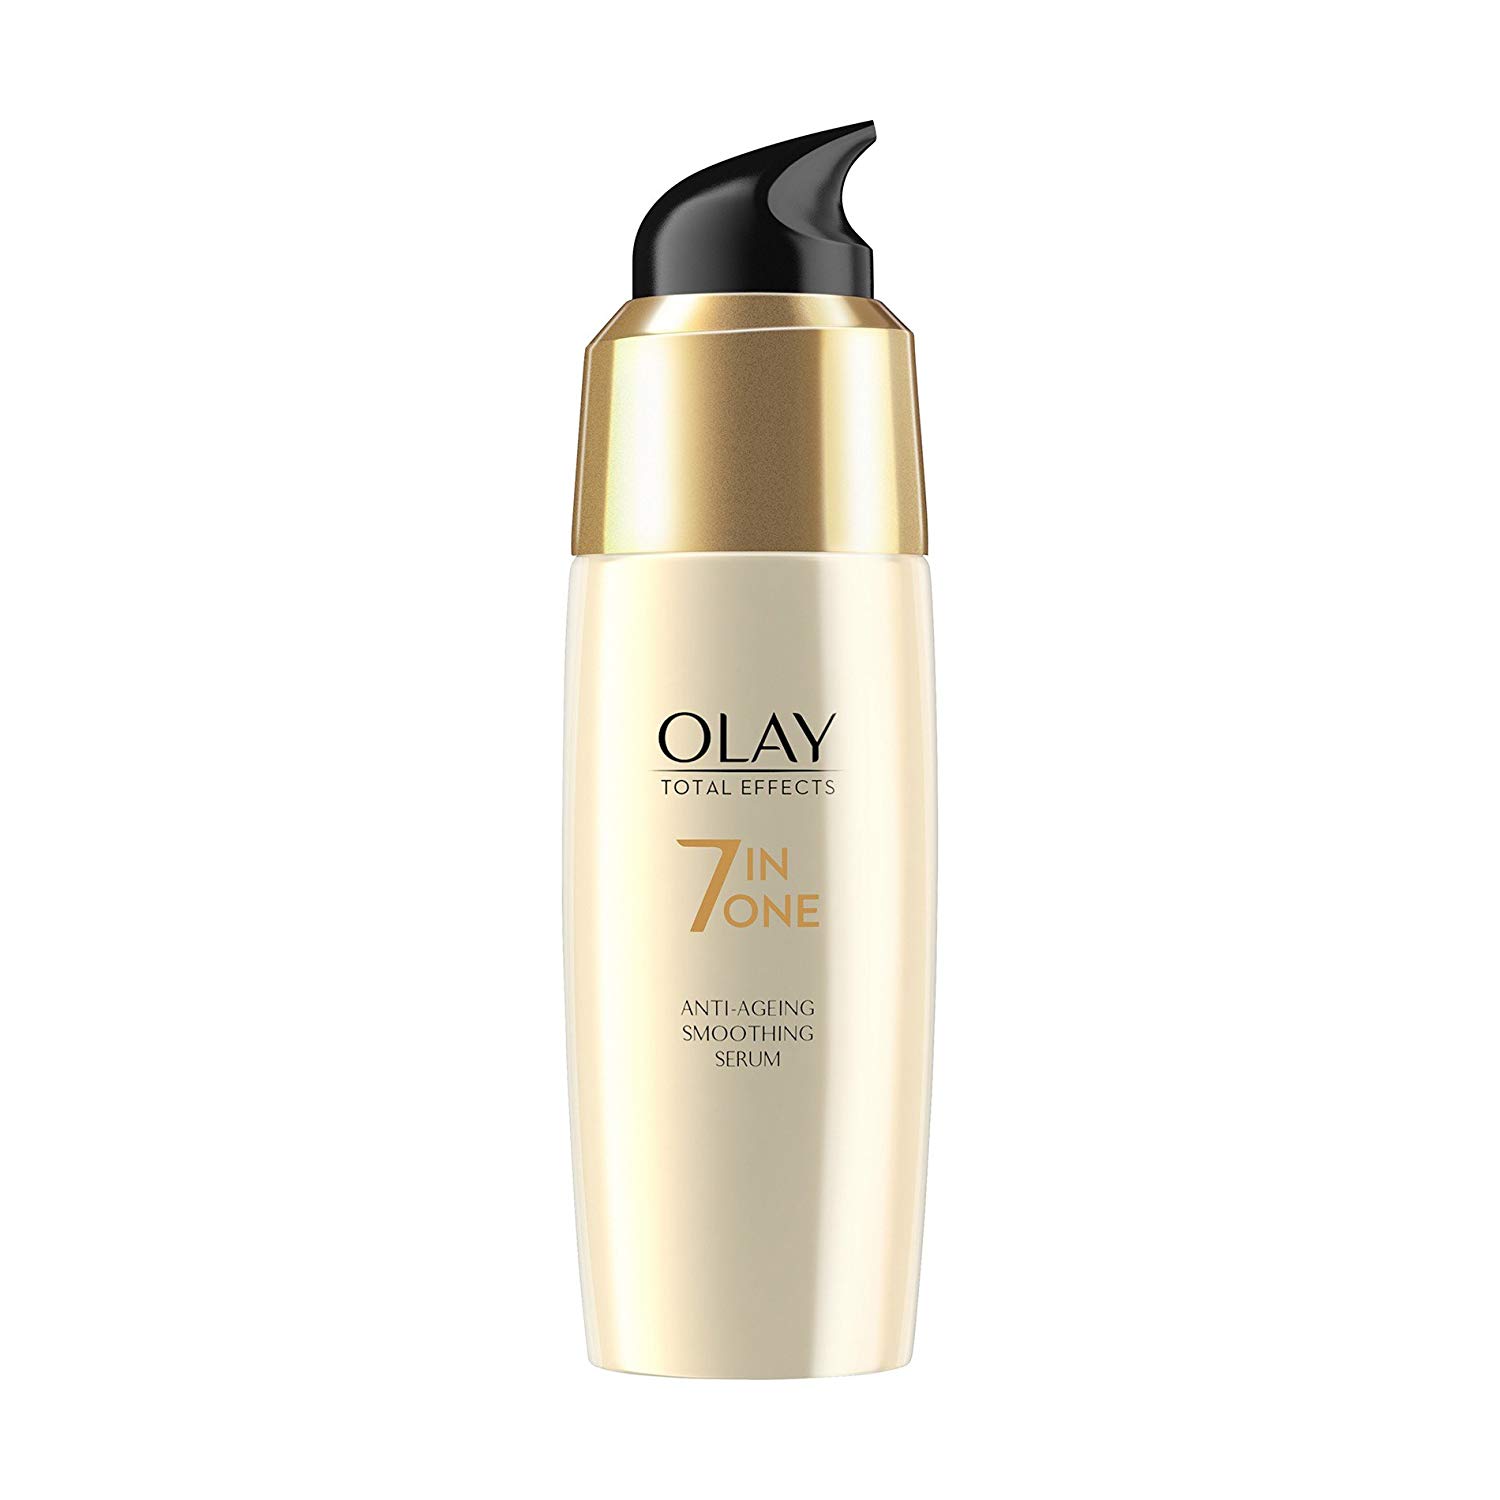 Olay Serum Total Effects Anti-Ageing Smoothing 7 in 1 Serum 